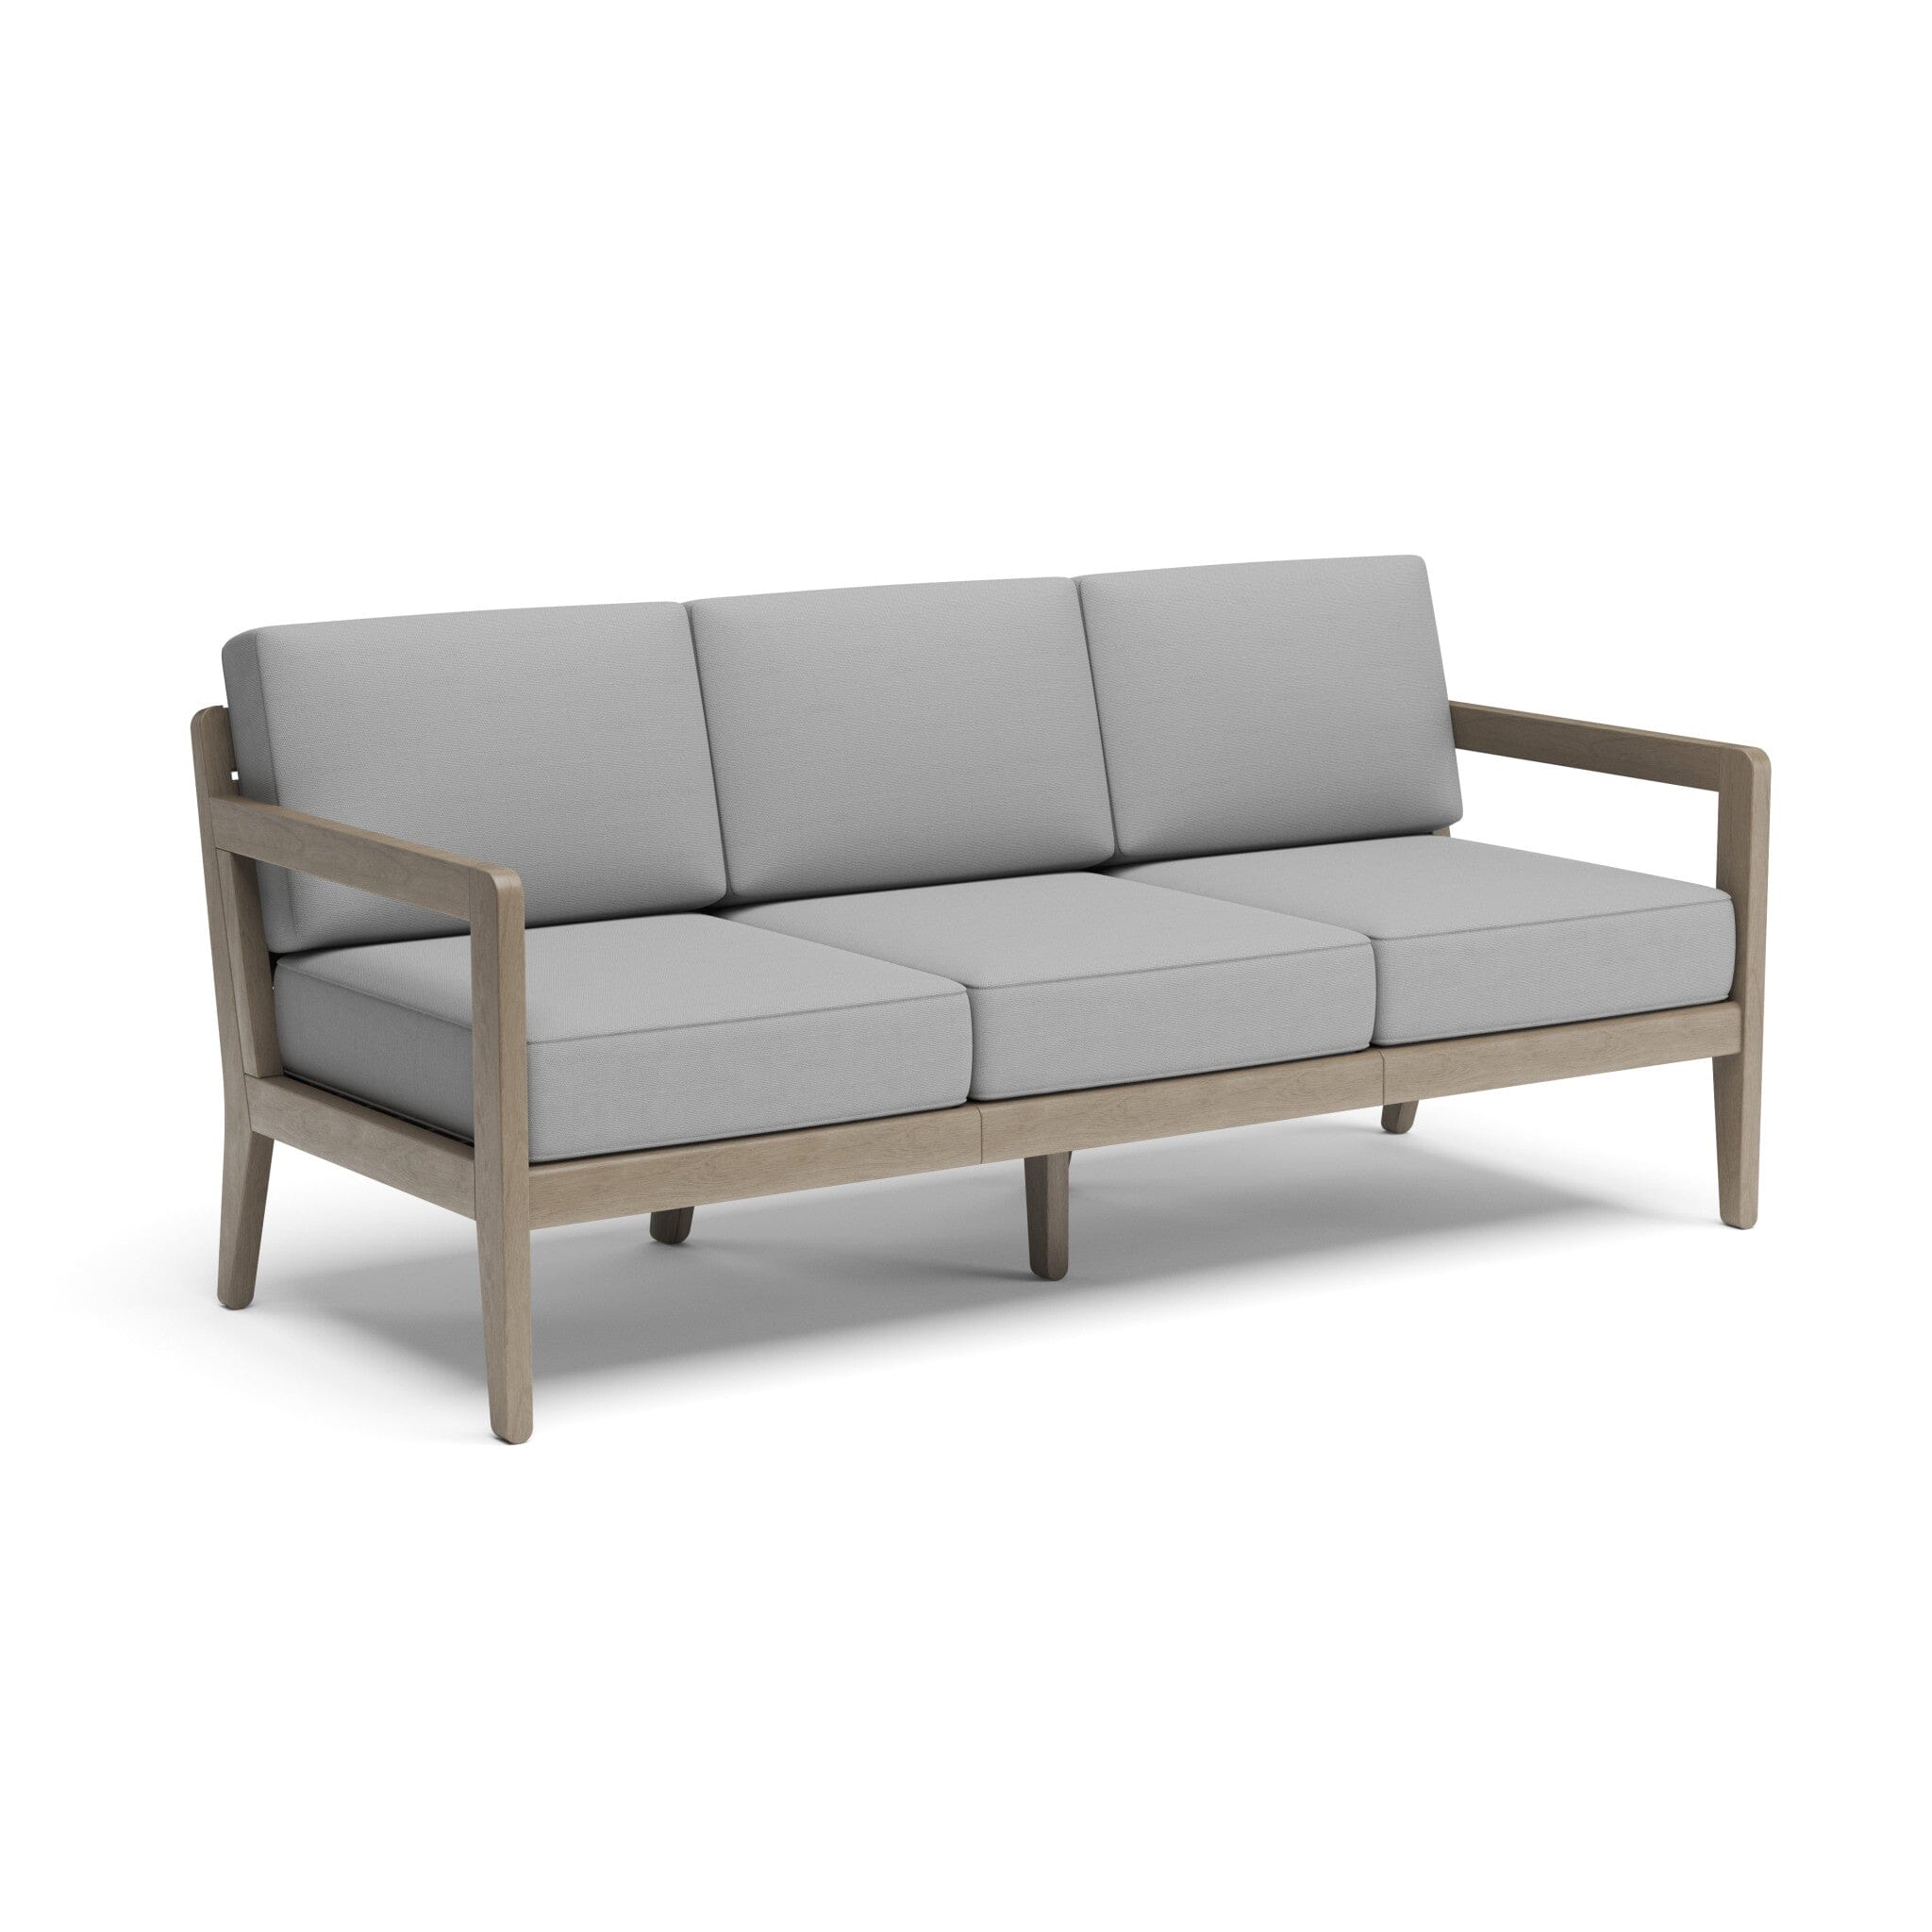 Transitional Outdoor Sofa 4-Piece Set By Sustain Sofa Sustain